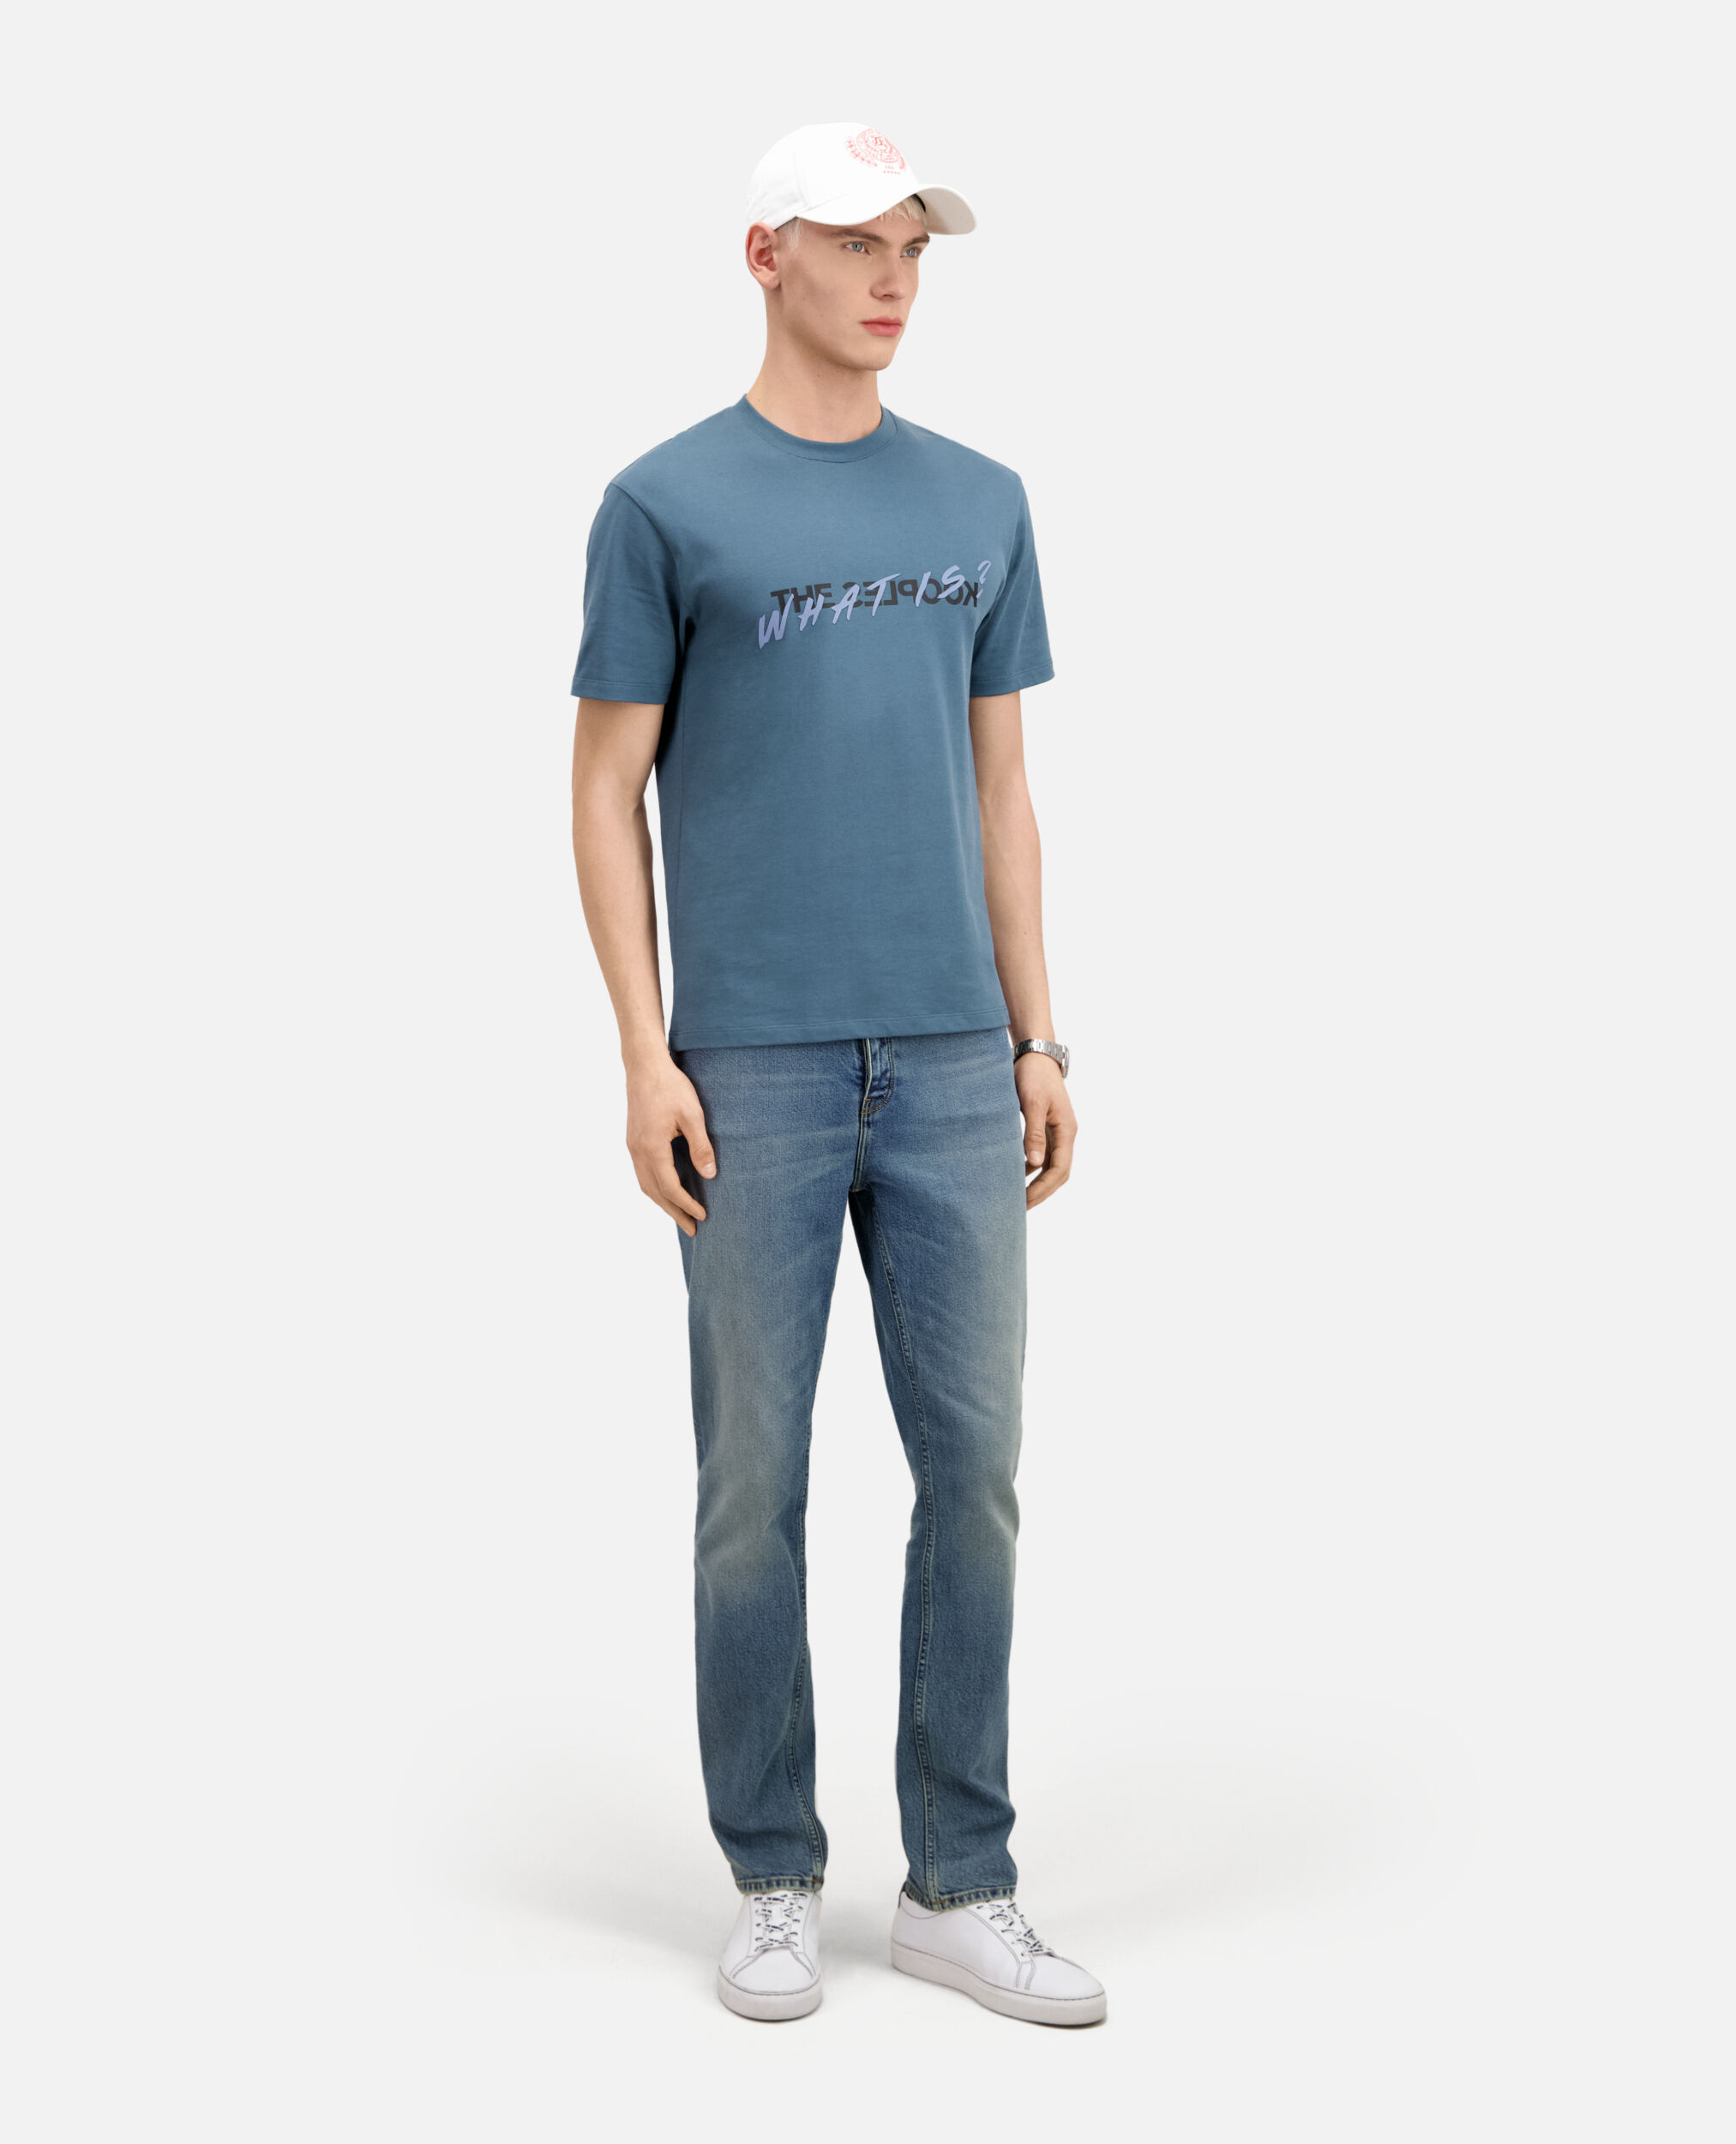 T-shirt Homme What is bleu profond, BLUE PETROL, hi-res image number null